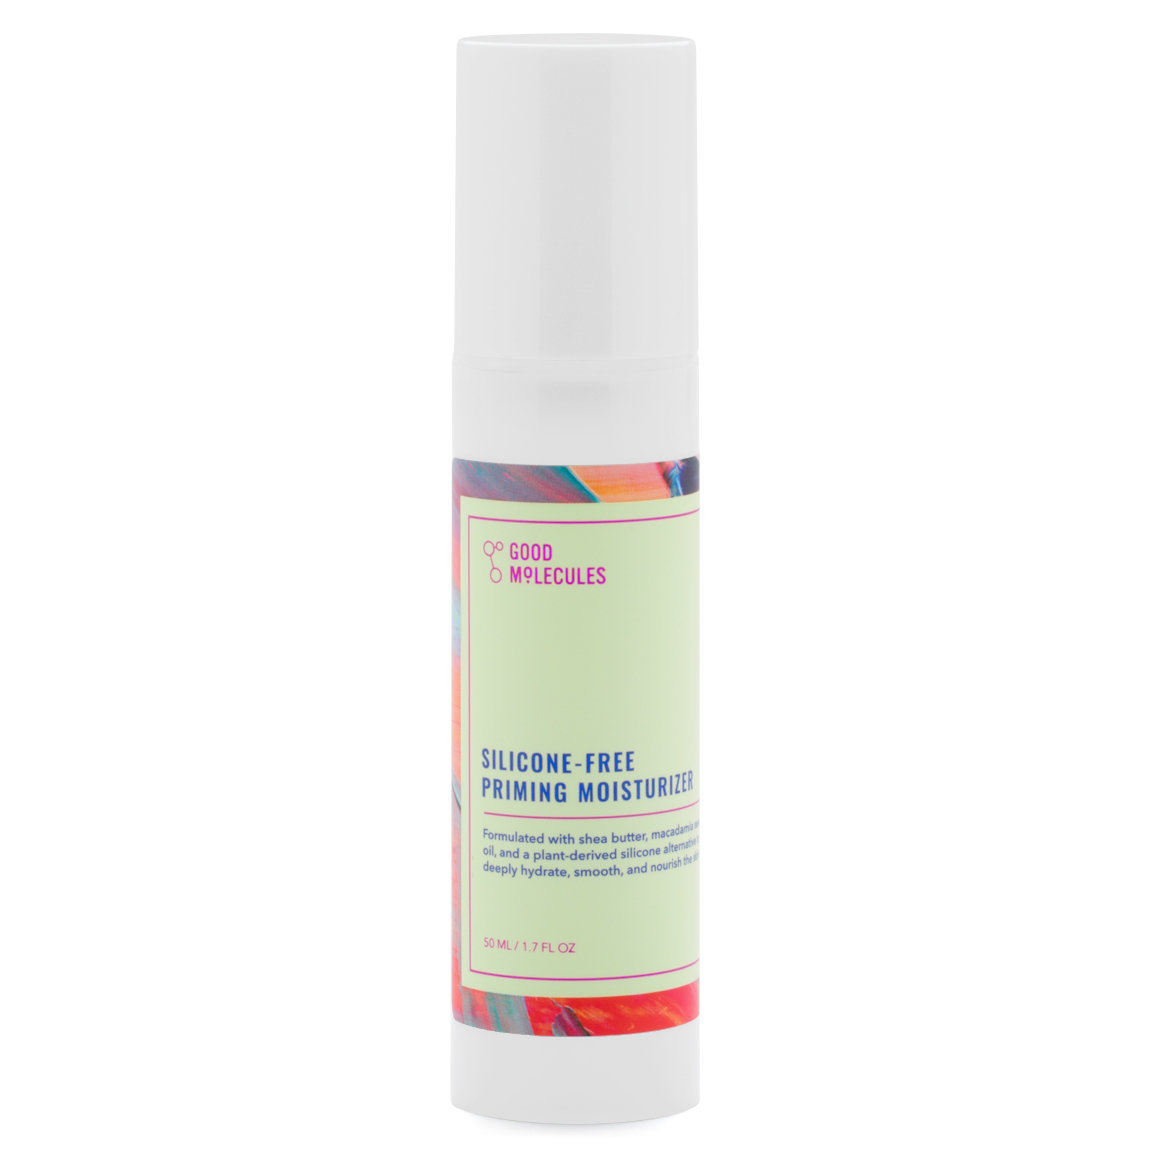 Good Molecules Silicone-Free Priming Moisturizer 50 ml alternative view 1 - product swatch.